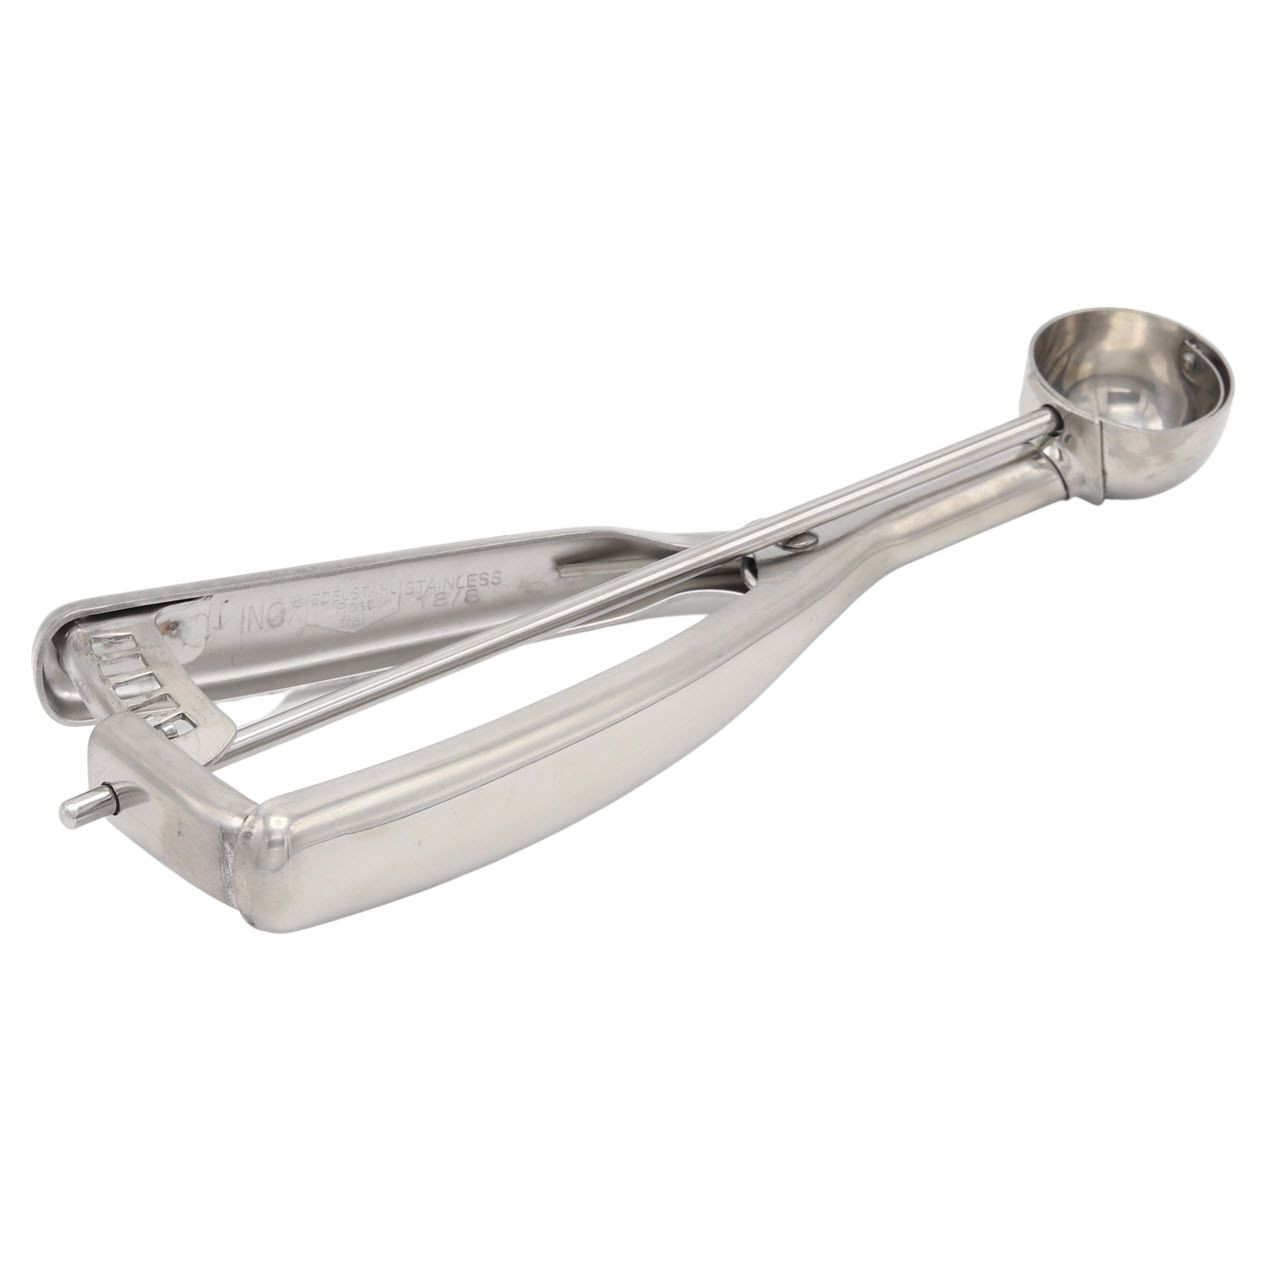 Fat Daddio's Stainless Steel Scoop #40